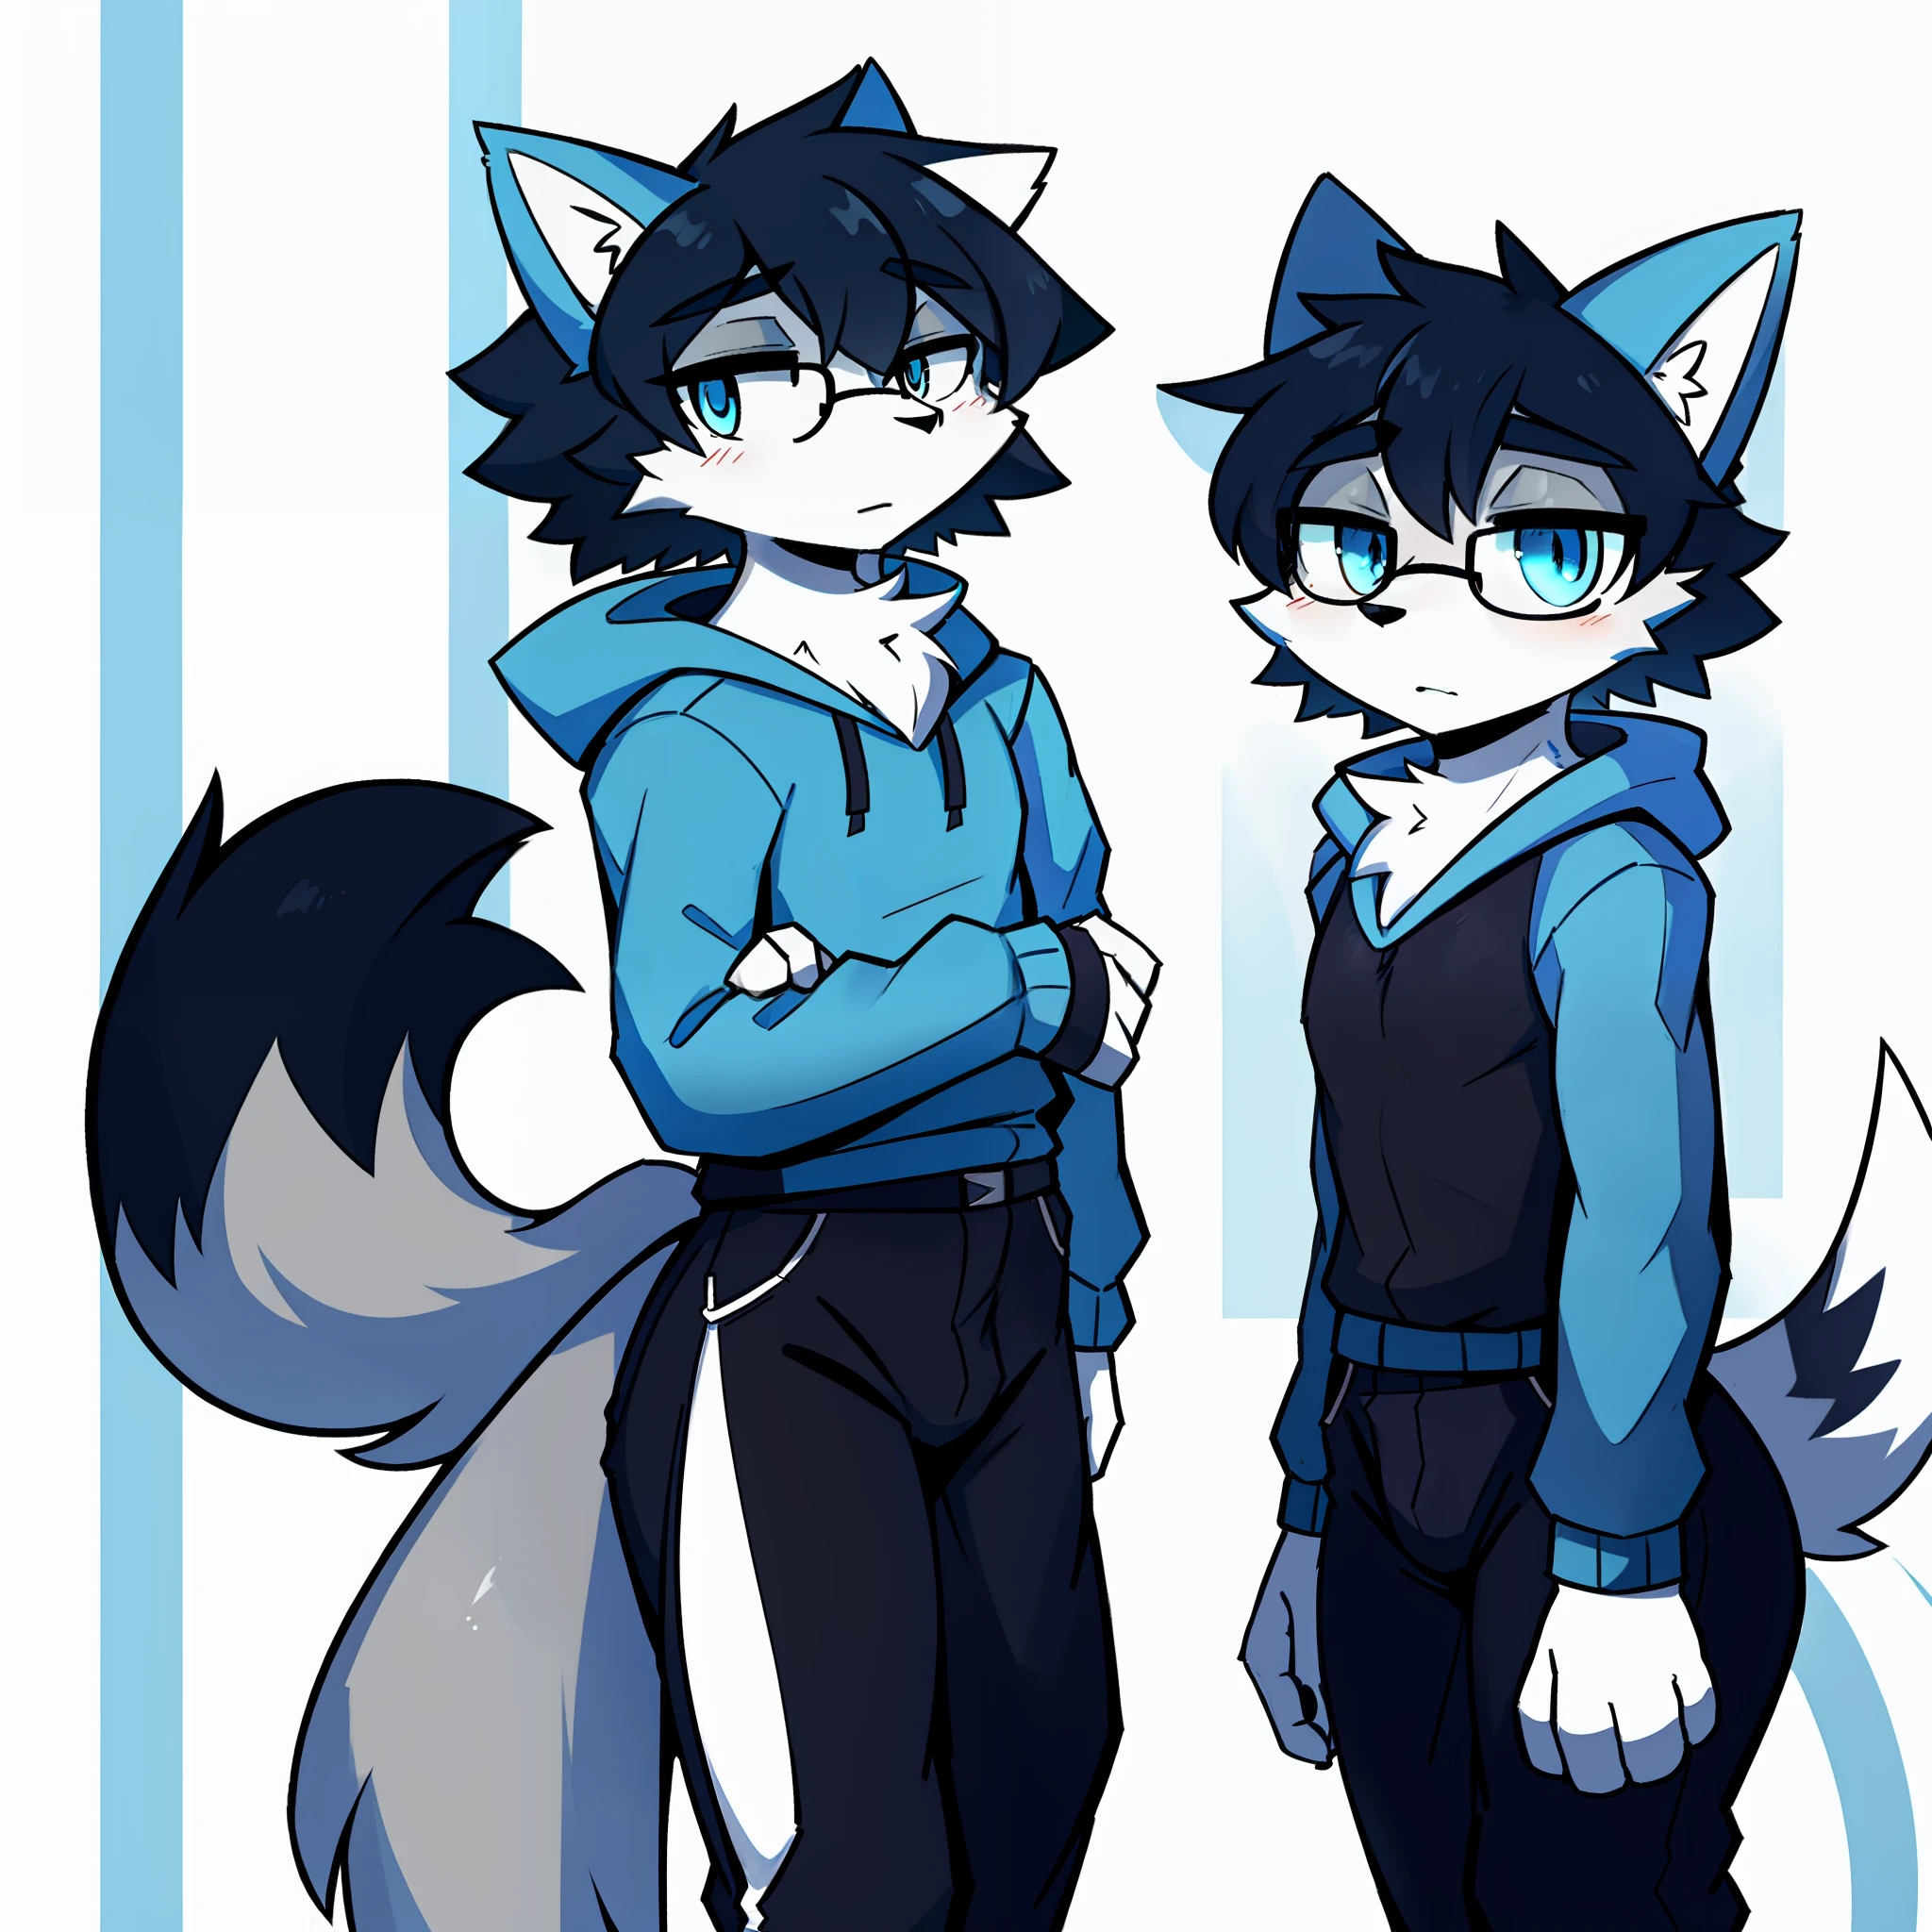 Solo, shaggy, furry male, , full body fur, gray-blue fur, gray-blue sweatshirt, gray-black trousers, black hair, black glasses, blue eyes, small canine, fluffy blue tail, male, serious, short hair, reference sheet